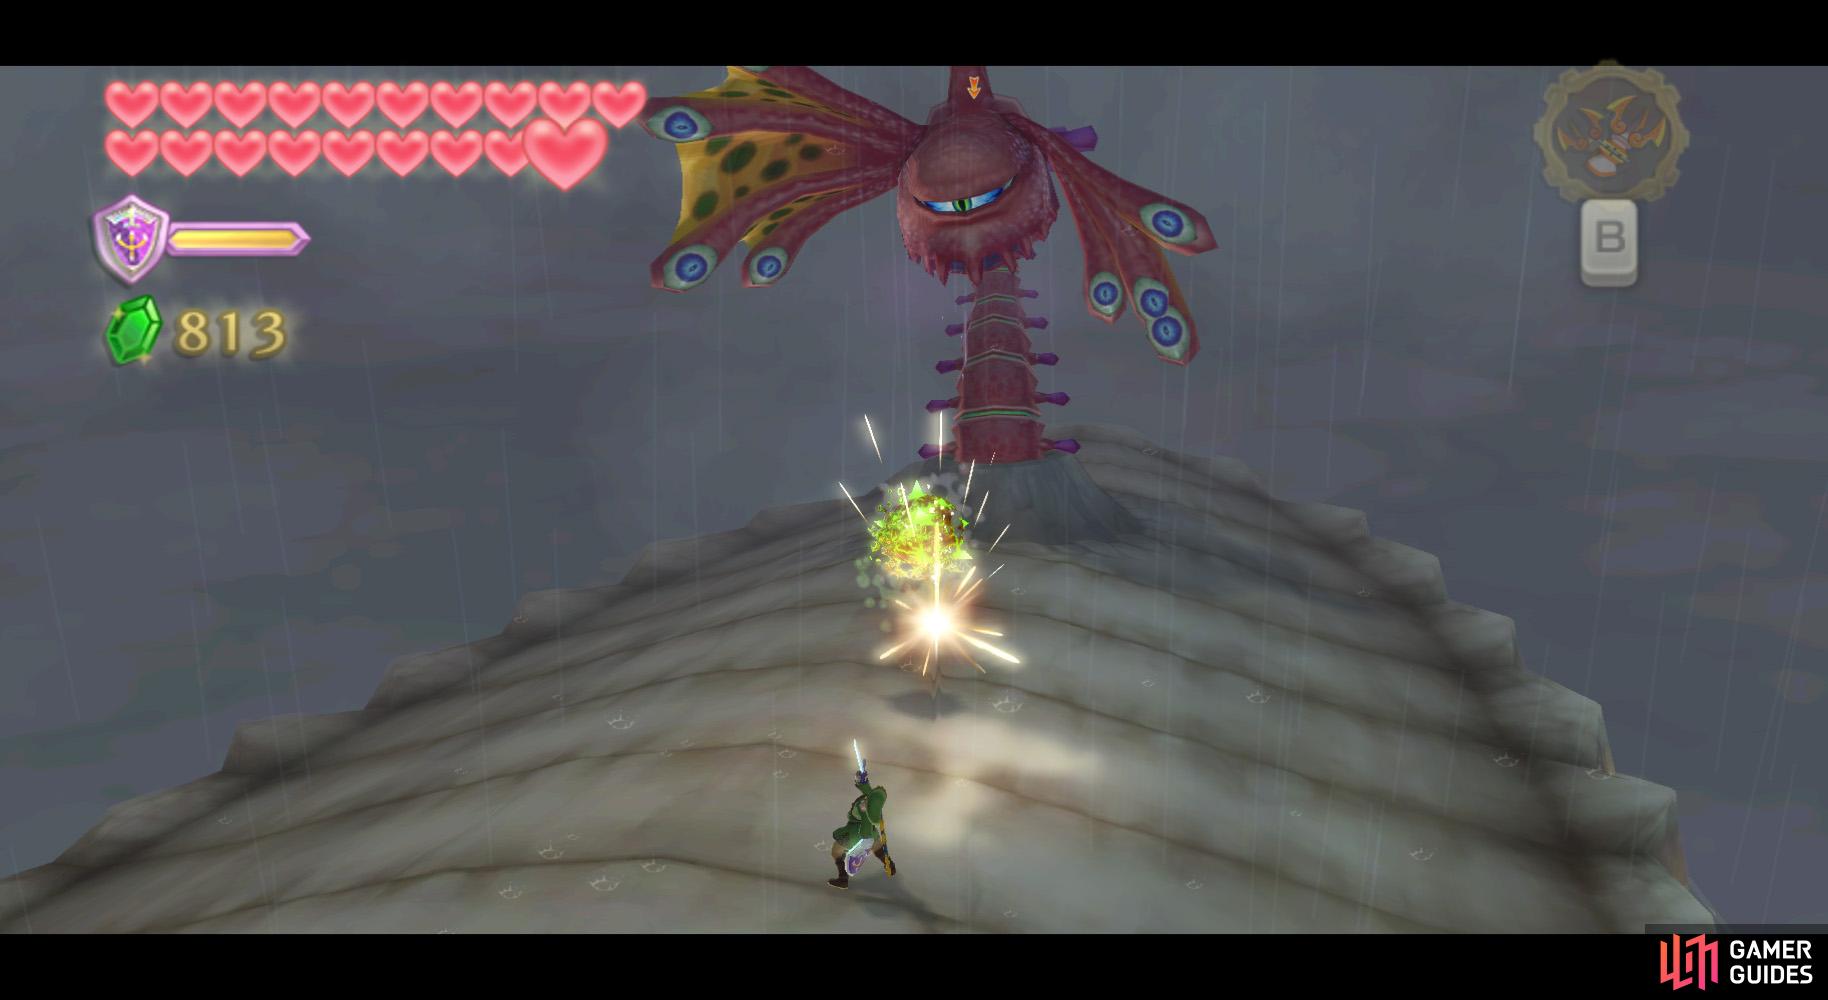 To start with, angle your sword swings to bounce the poison orbs towards Bilocytes head wings.